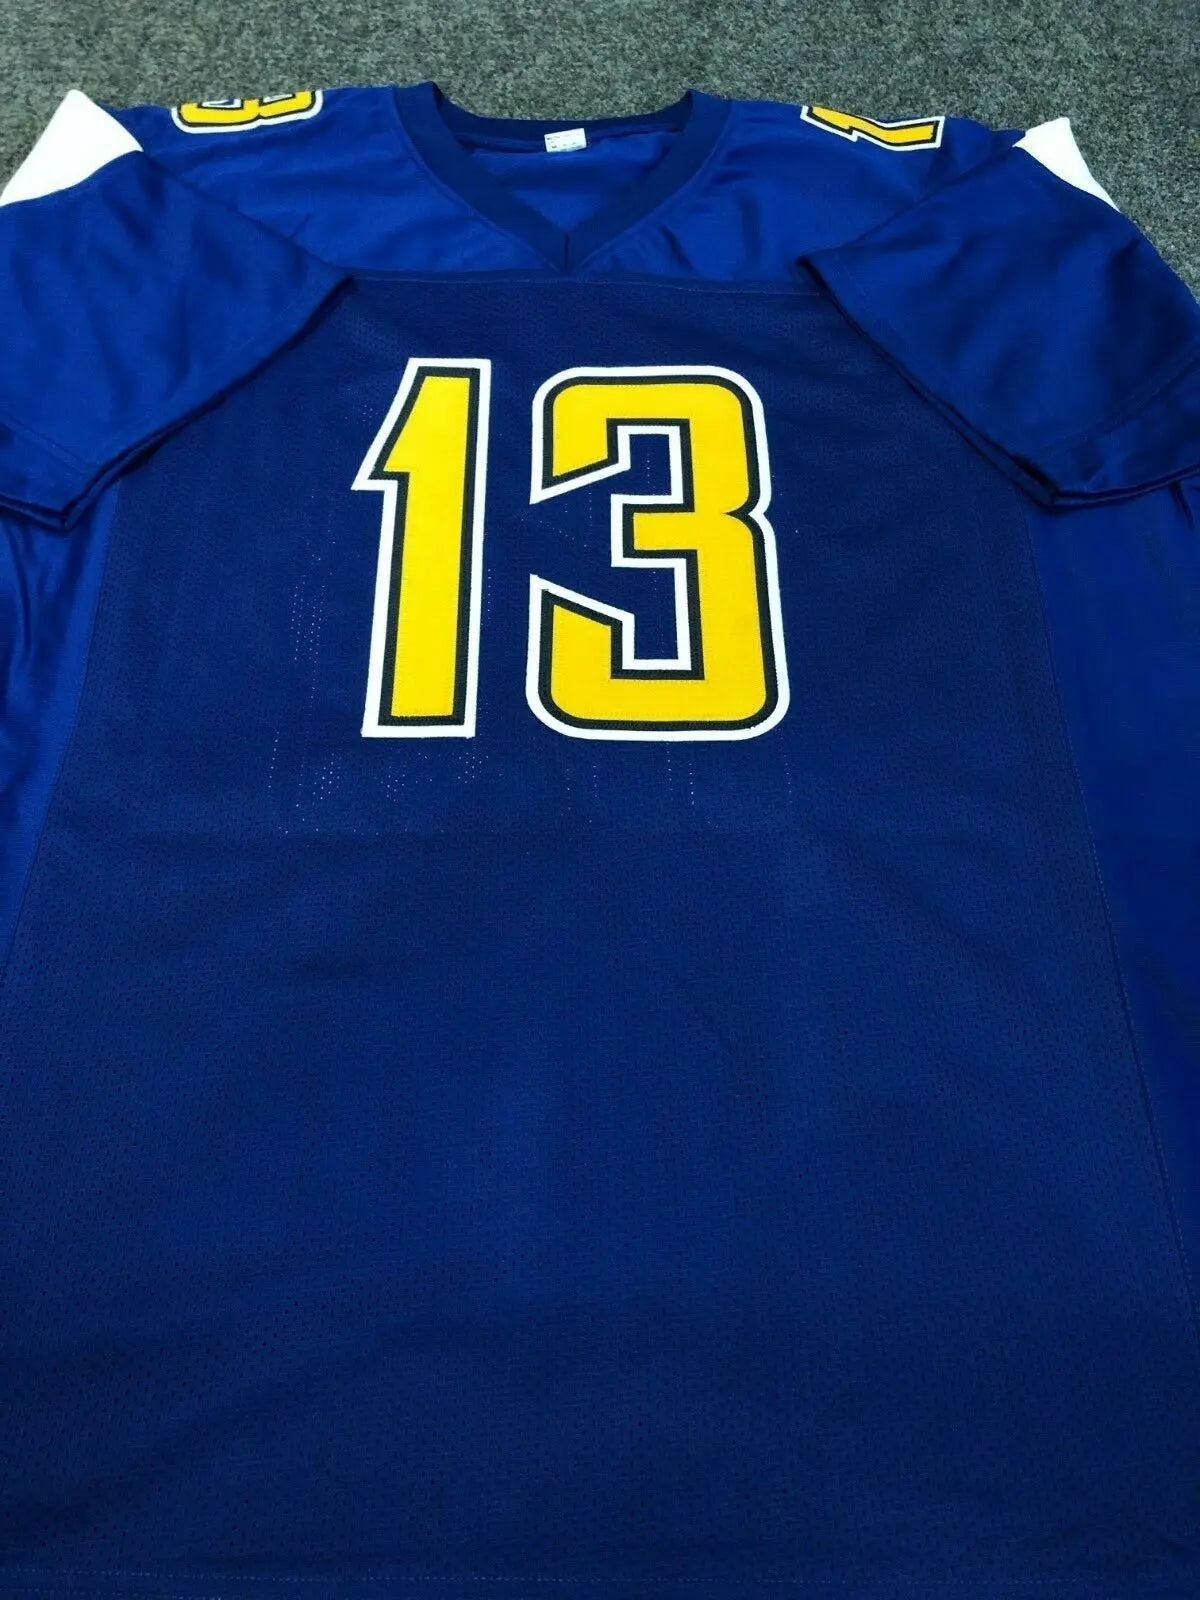 La Chargers Jersey in Chargers Blue